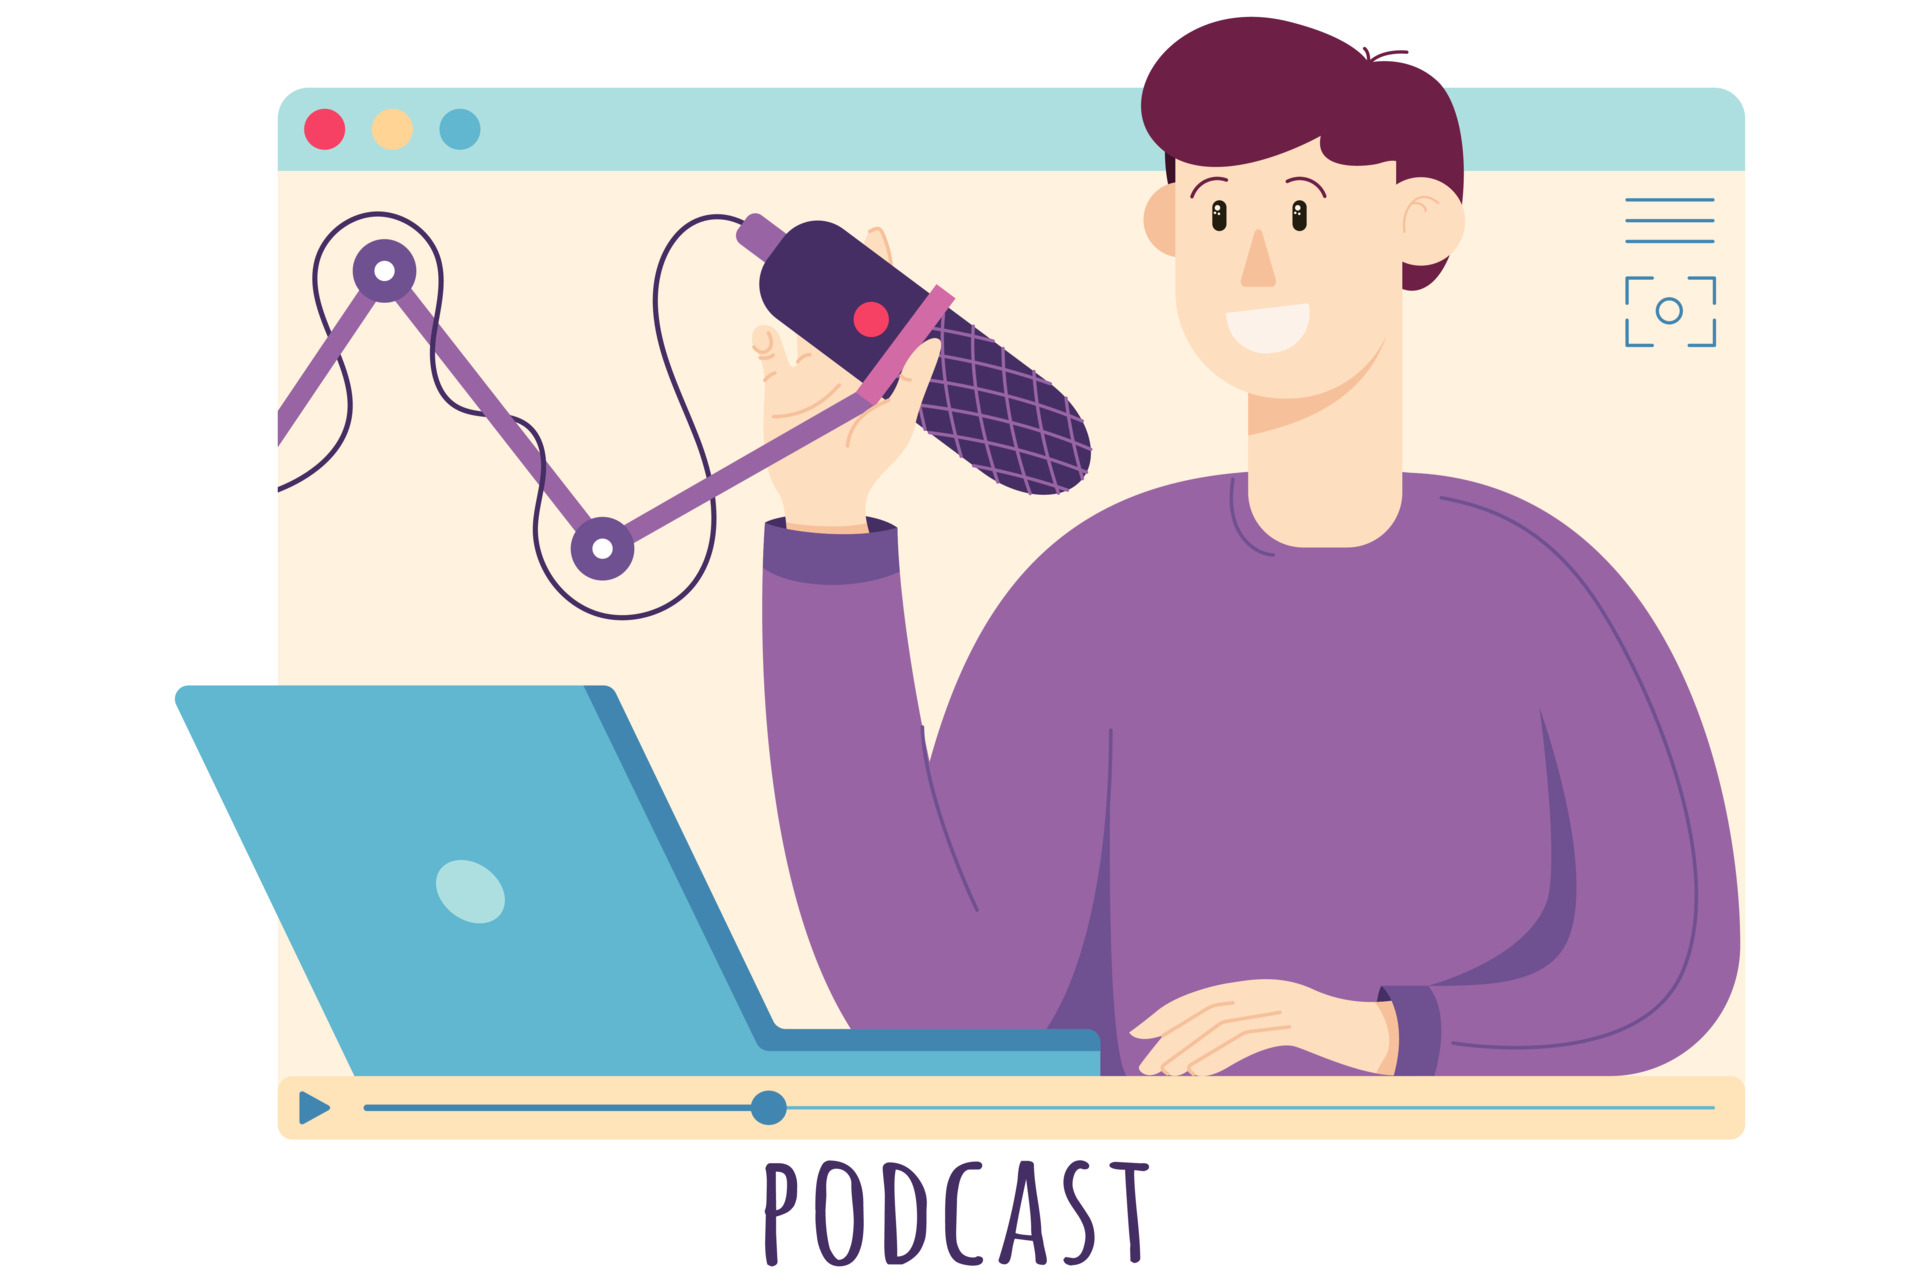 Podcast business - Man recording podcast